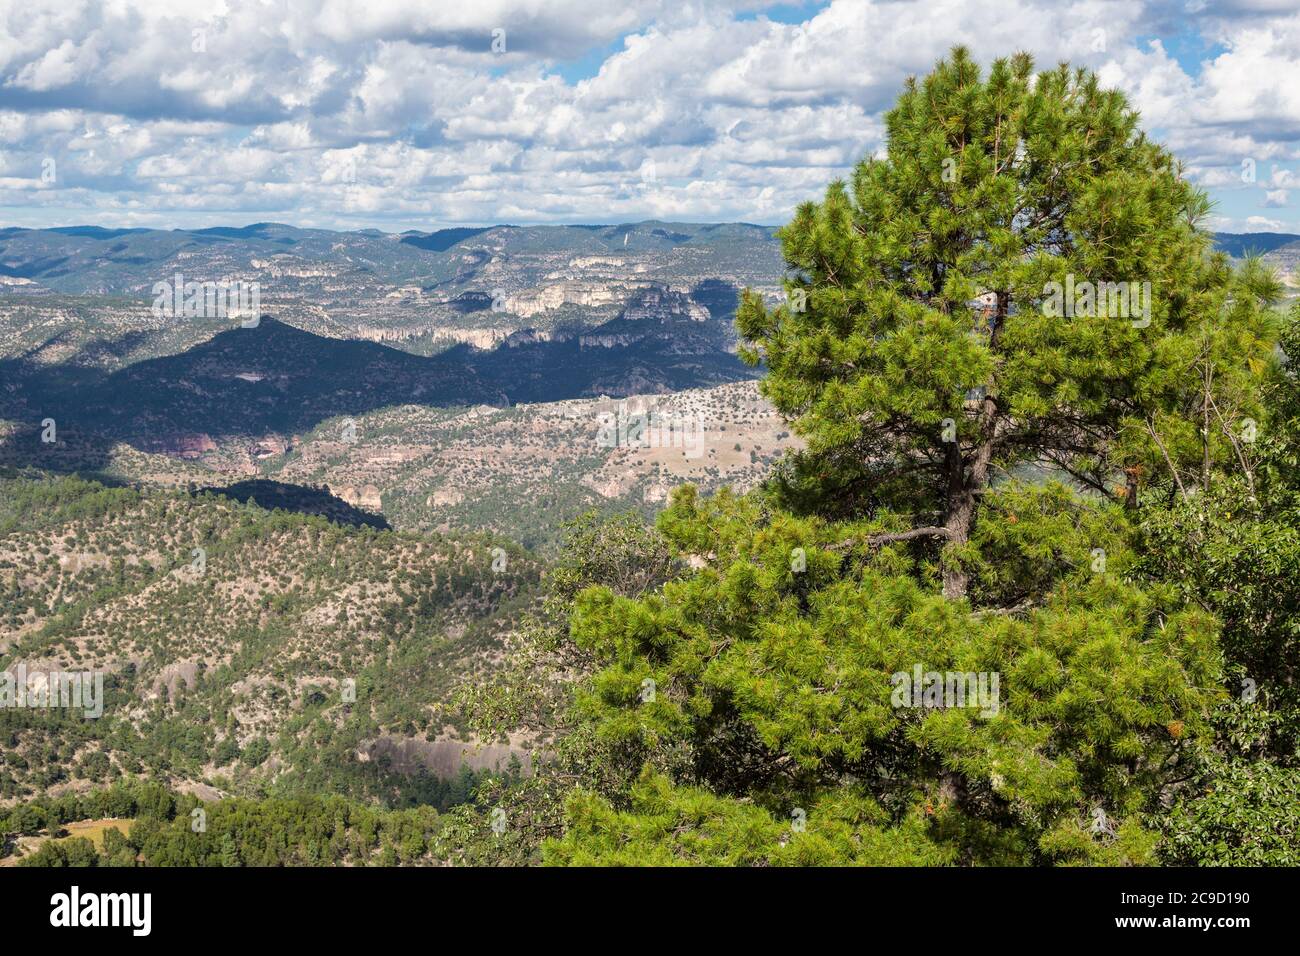 Chihuahua Pine (pinus leiophylla),Urique Canyon in background, part of the Copper Canyon Complex, Chihuahua, Mexico. Stock Photo